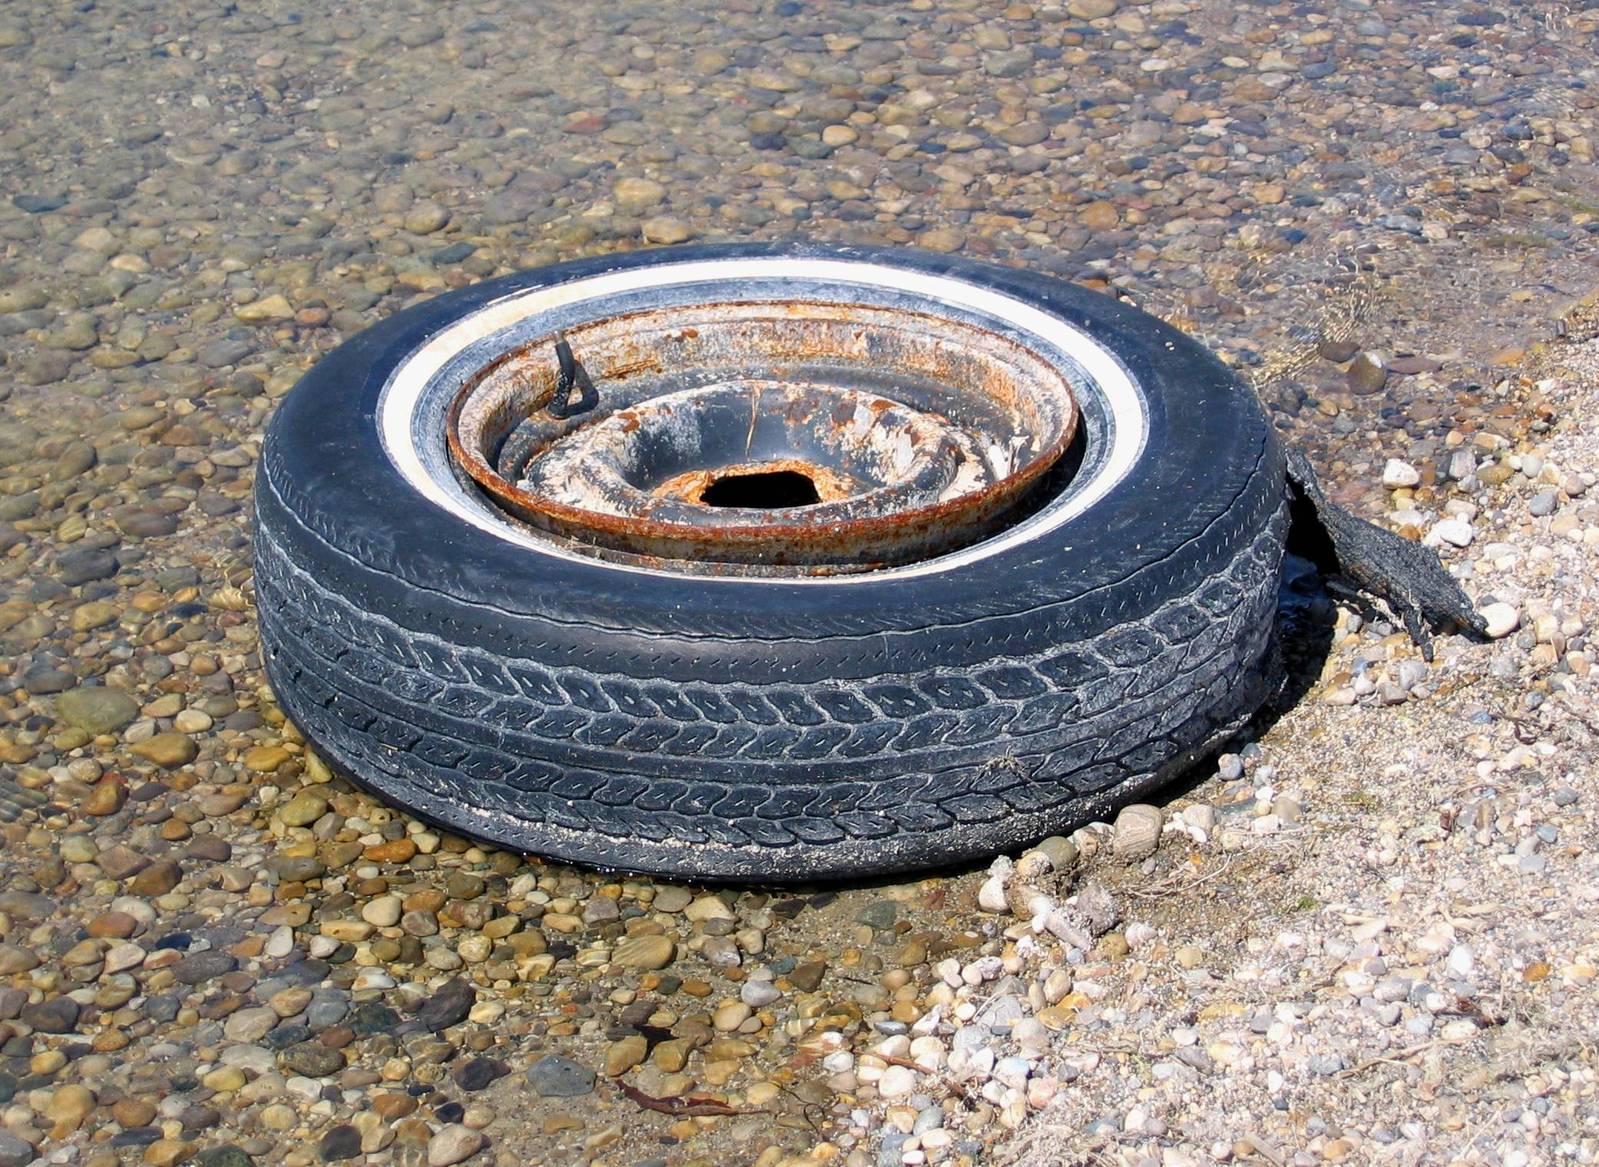 a tire and spoke from an old automobile on the edge of the water